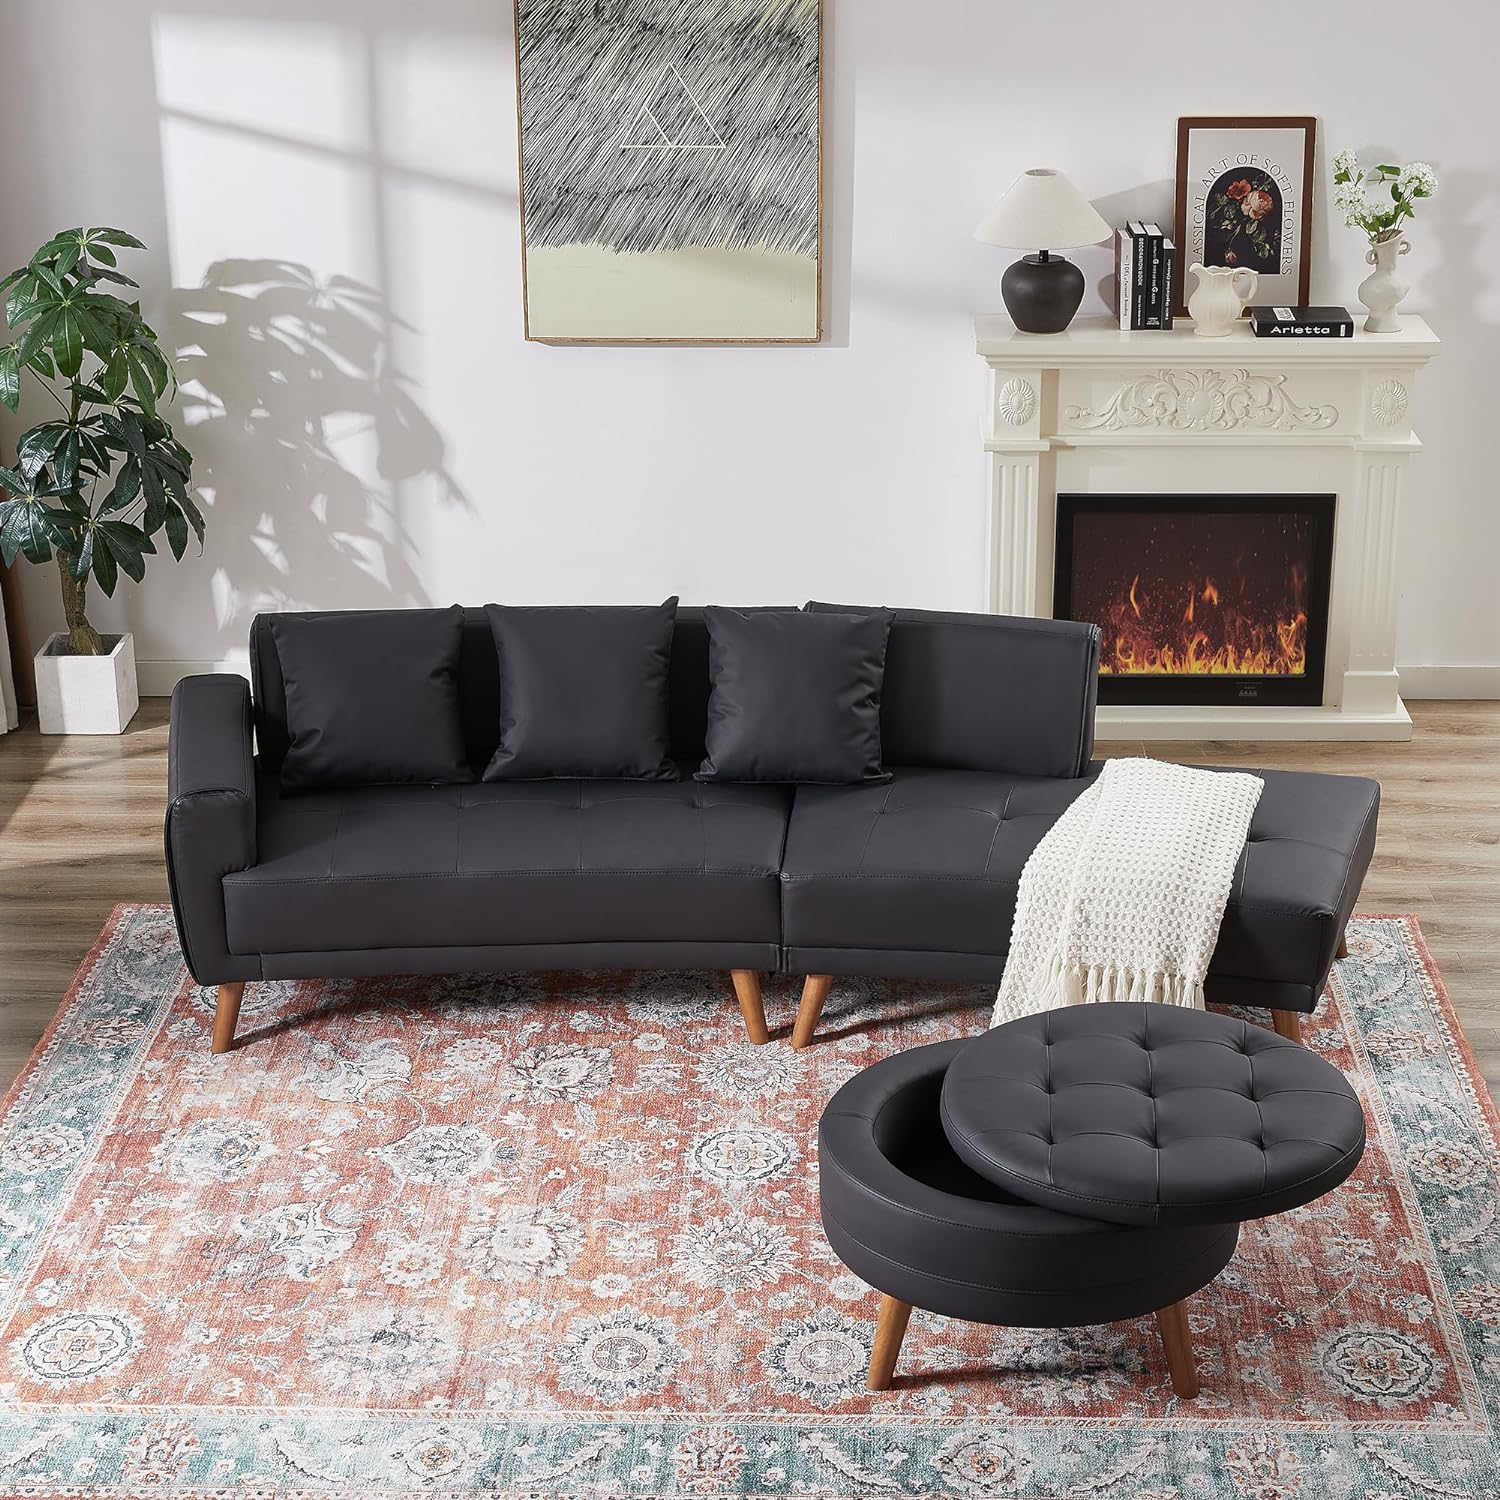 This sectional is so soft and comfortable, and the texture is beautiful. It is definitely big enough for entertaining. It was easy to put together, and I love that it comes with fasteners that keep the pieces from sliding apart. Great value for money. I would 100% purchase again.